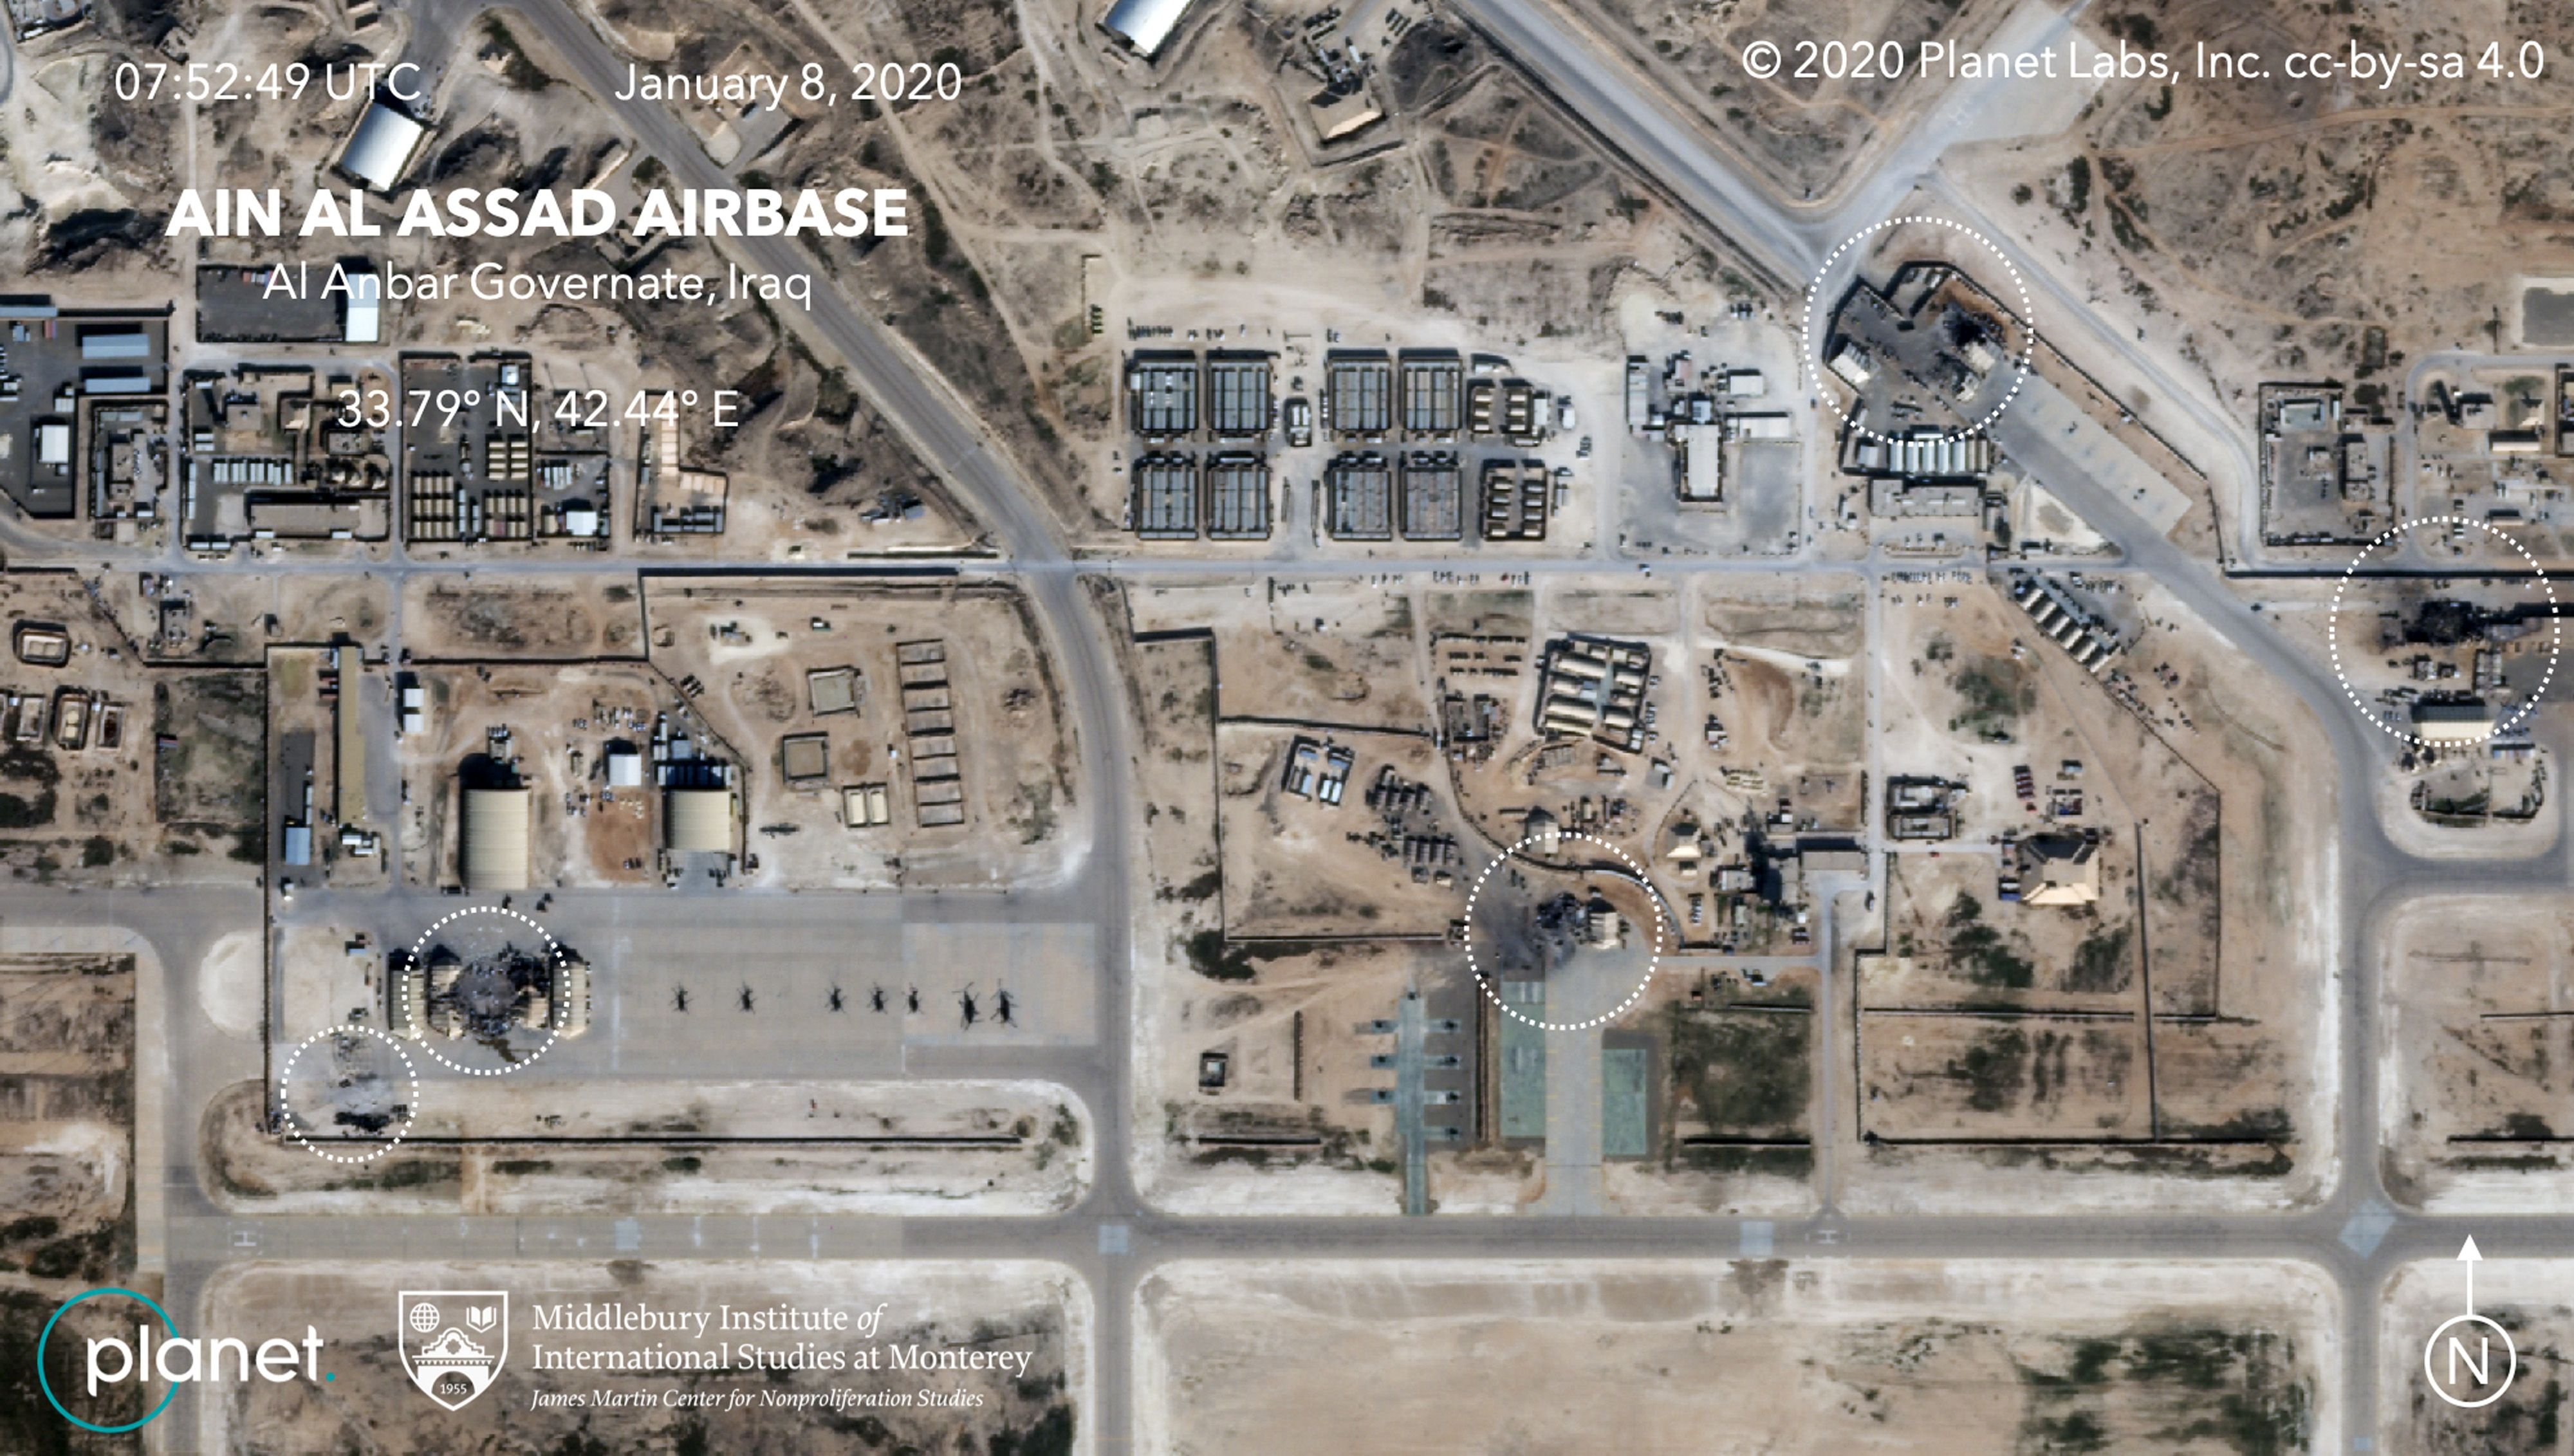 This January 8, 2020, satellite image released by Planet Labs Inc., and annotated analysis by Middlebury Institute of International Studies at Monterey (MIIS), reportedly shows damage to the Ain al-Asad US airbase in western Iraq, after being hit by rockets from Iran. Iran fired a volley of missiles on January 8 at Iraqi bases housing US and other foreign troops, the Islamic republic's first act in its promised revenge for the US killing of Iranian General Qasem Soleimani. - RESTRICTED TO EDITORIAL USE - MANDATORY CREDIT "AFP PHOTO / Planet Labs Inc. / MIIS" - NO MARKETING - NO ADVERTISING CAMPAIGNS - DISTRIBUTED AS A SERVICE TO CLIENTS
 / AFP / Planet Labs Inc., MIIS / HO / RESTRICTED TO EDITORIAL USE - MANDATORY CREDIT "AFP PHOTO / Planet Labs Inc. / MIIS" - NO MARKETING - NO ADVERTISING CAMPAIGNS - DISTRIBUTED AS A SERVICE TO CLIENTS
